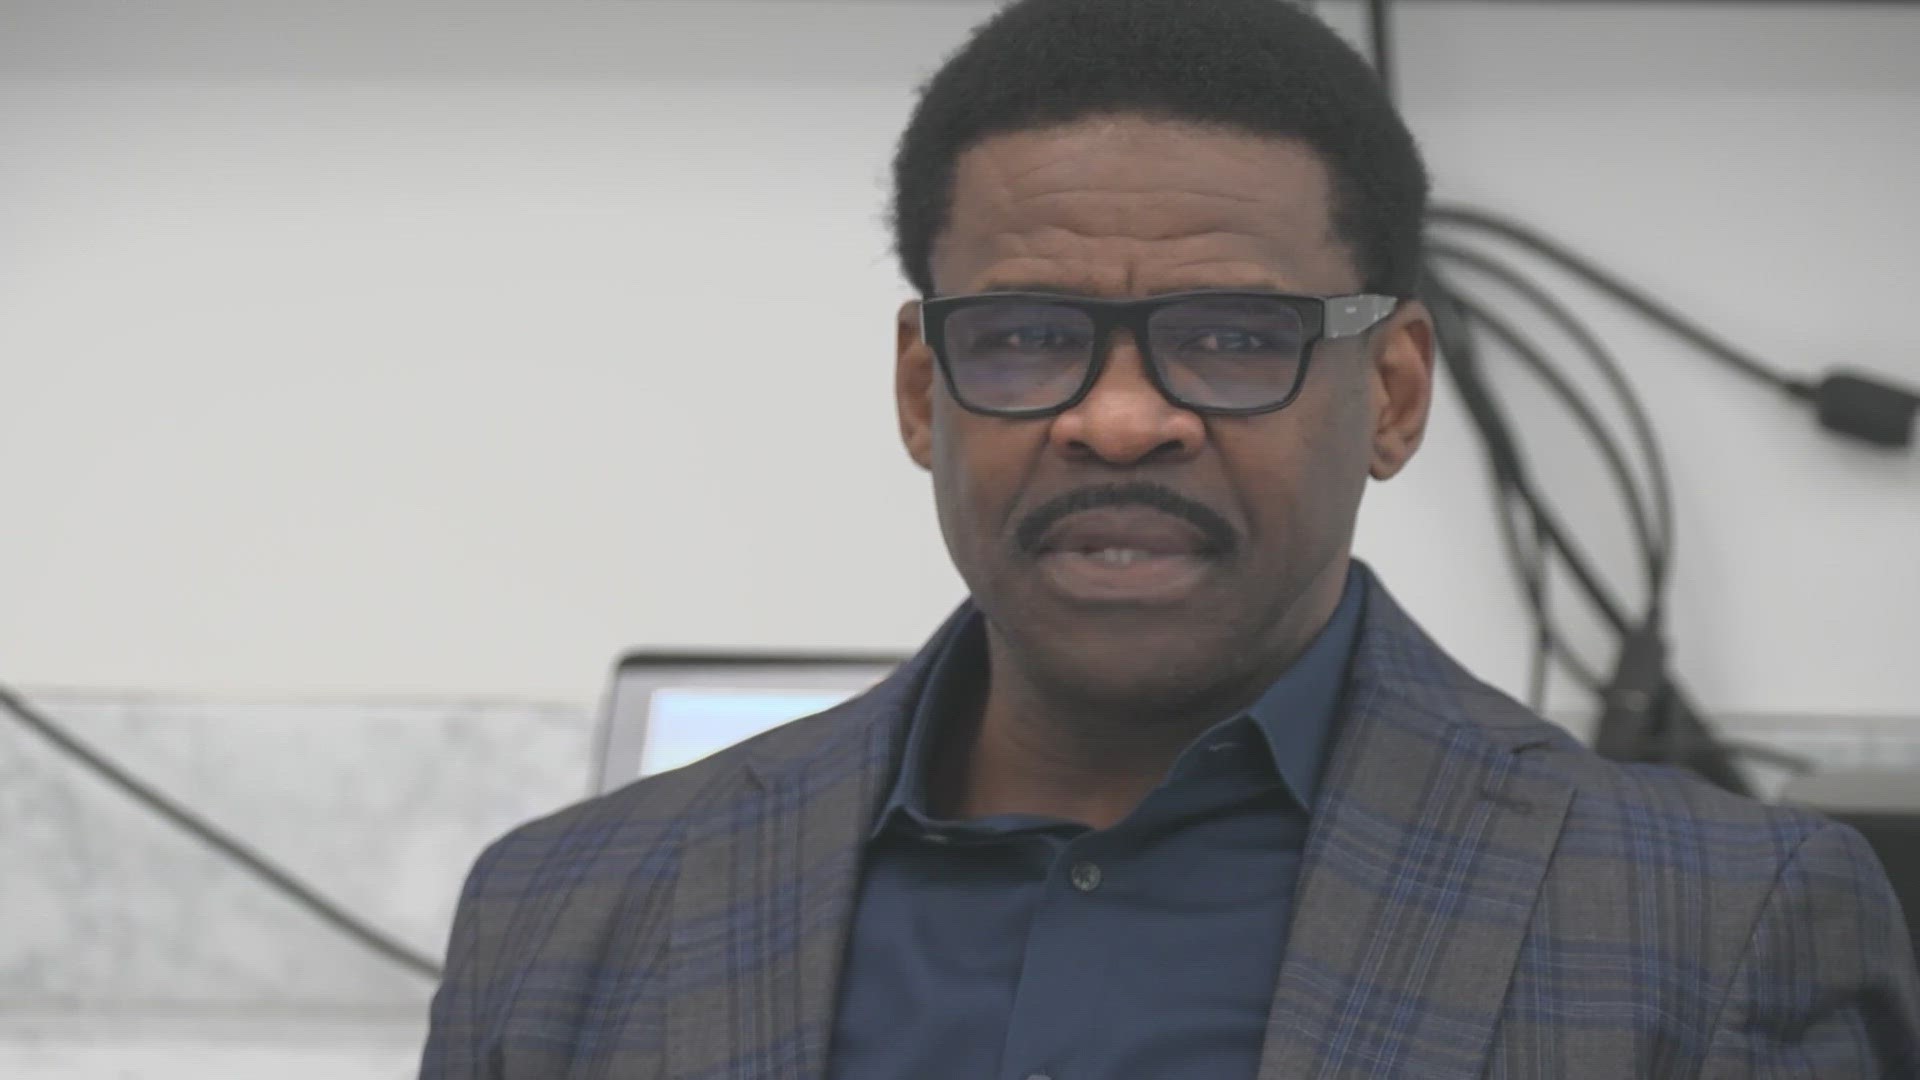 "How can I defend myself if I don't even know what I'm defending myself against," Dallas Cowboys legend Michael Irvin said at a news conference.